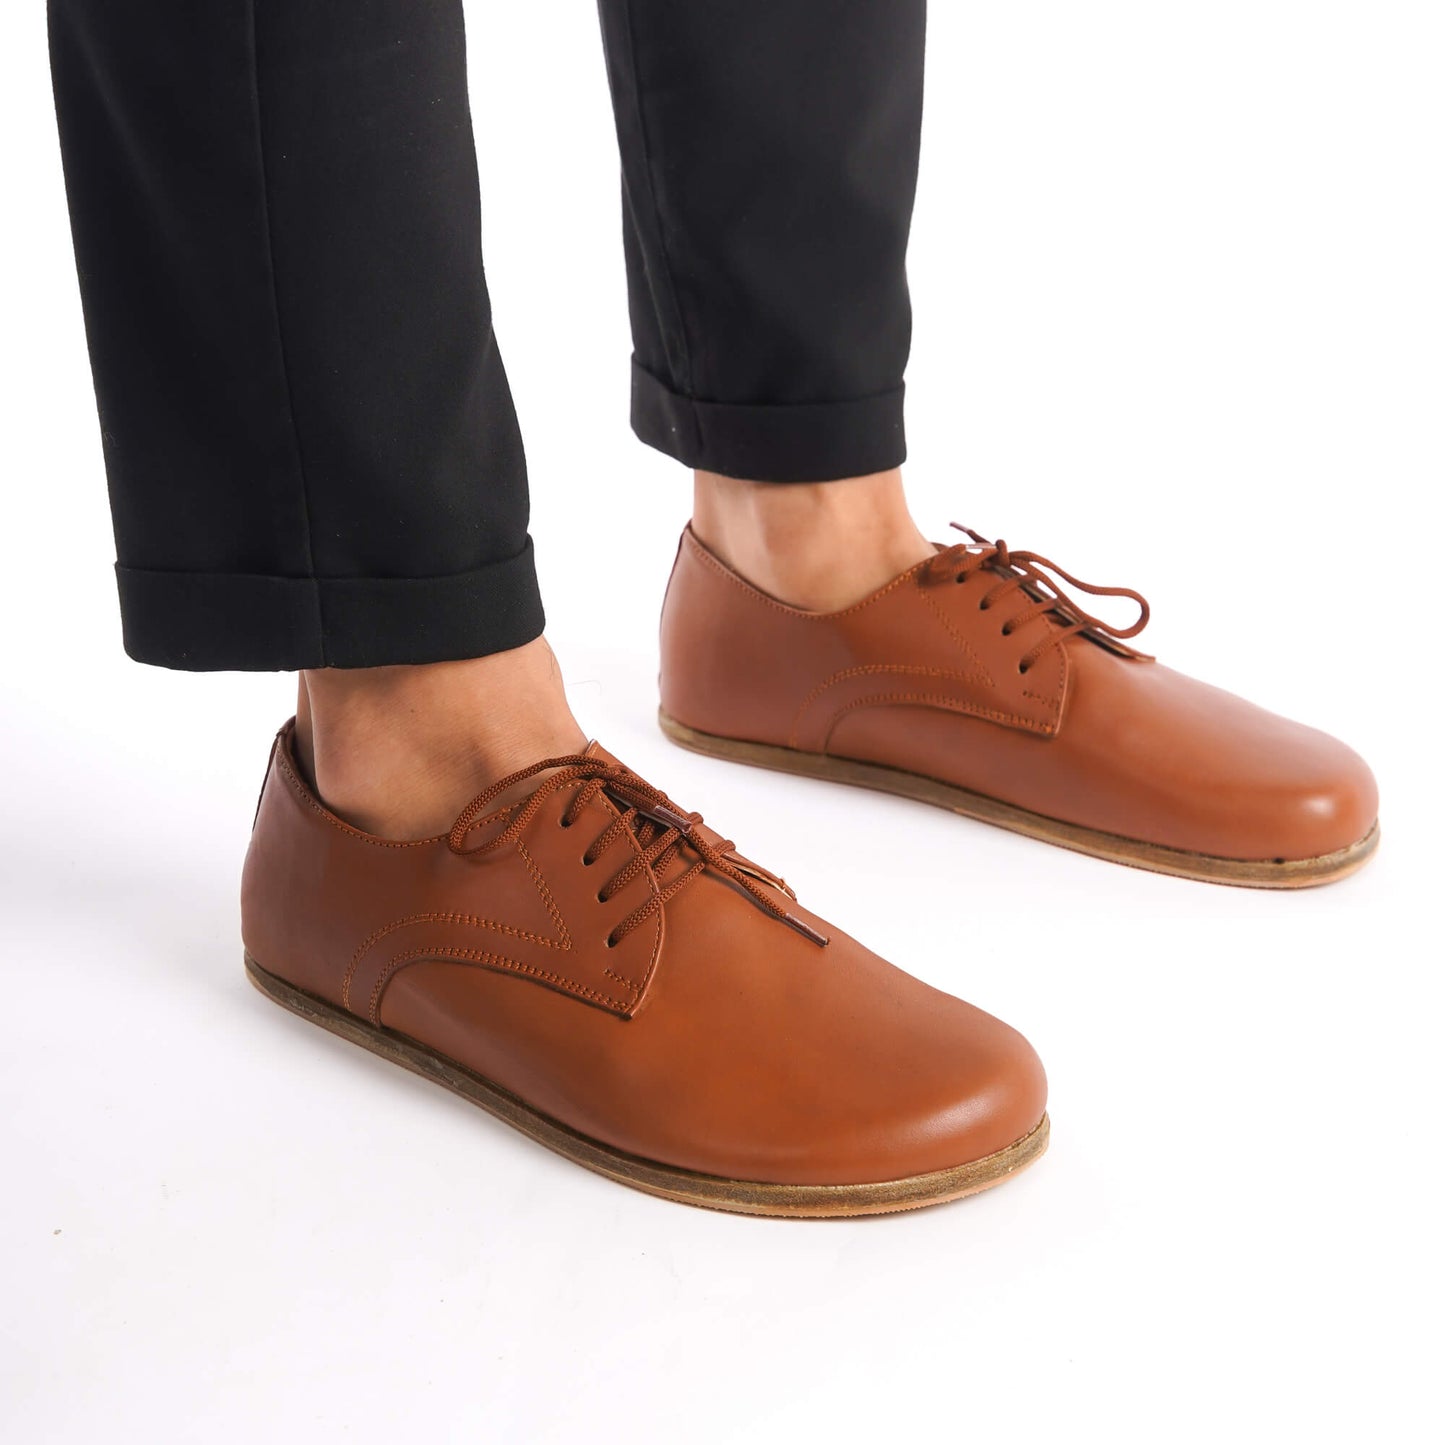 Model wearing Locris Leather Barefoot Men's Oxfords in tan brown, demonstrating their lightweight and flexible construction.